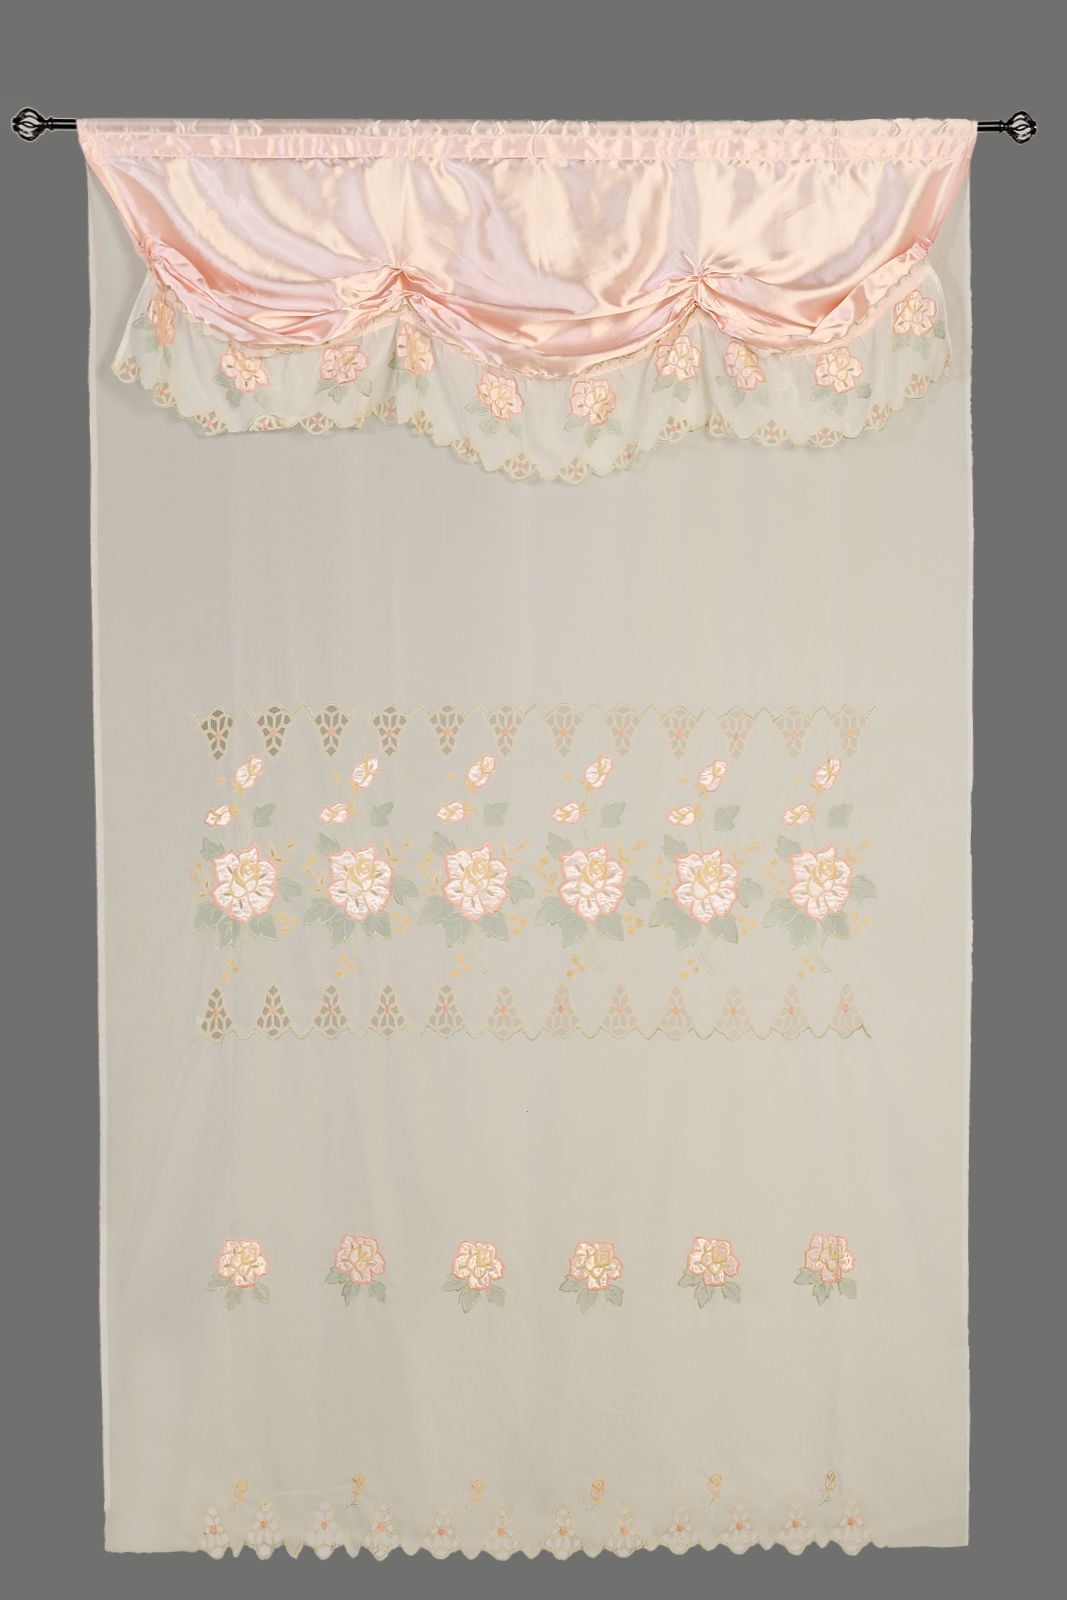 Peach Pink Room Decor Embroidery Sheer Valence Window Curtain Drapes 60x90+18" 